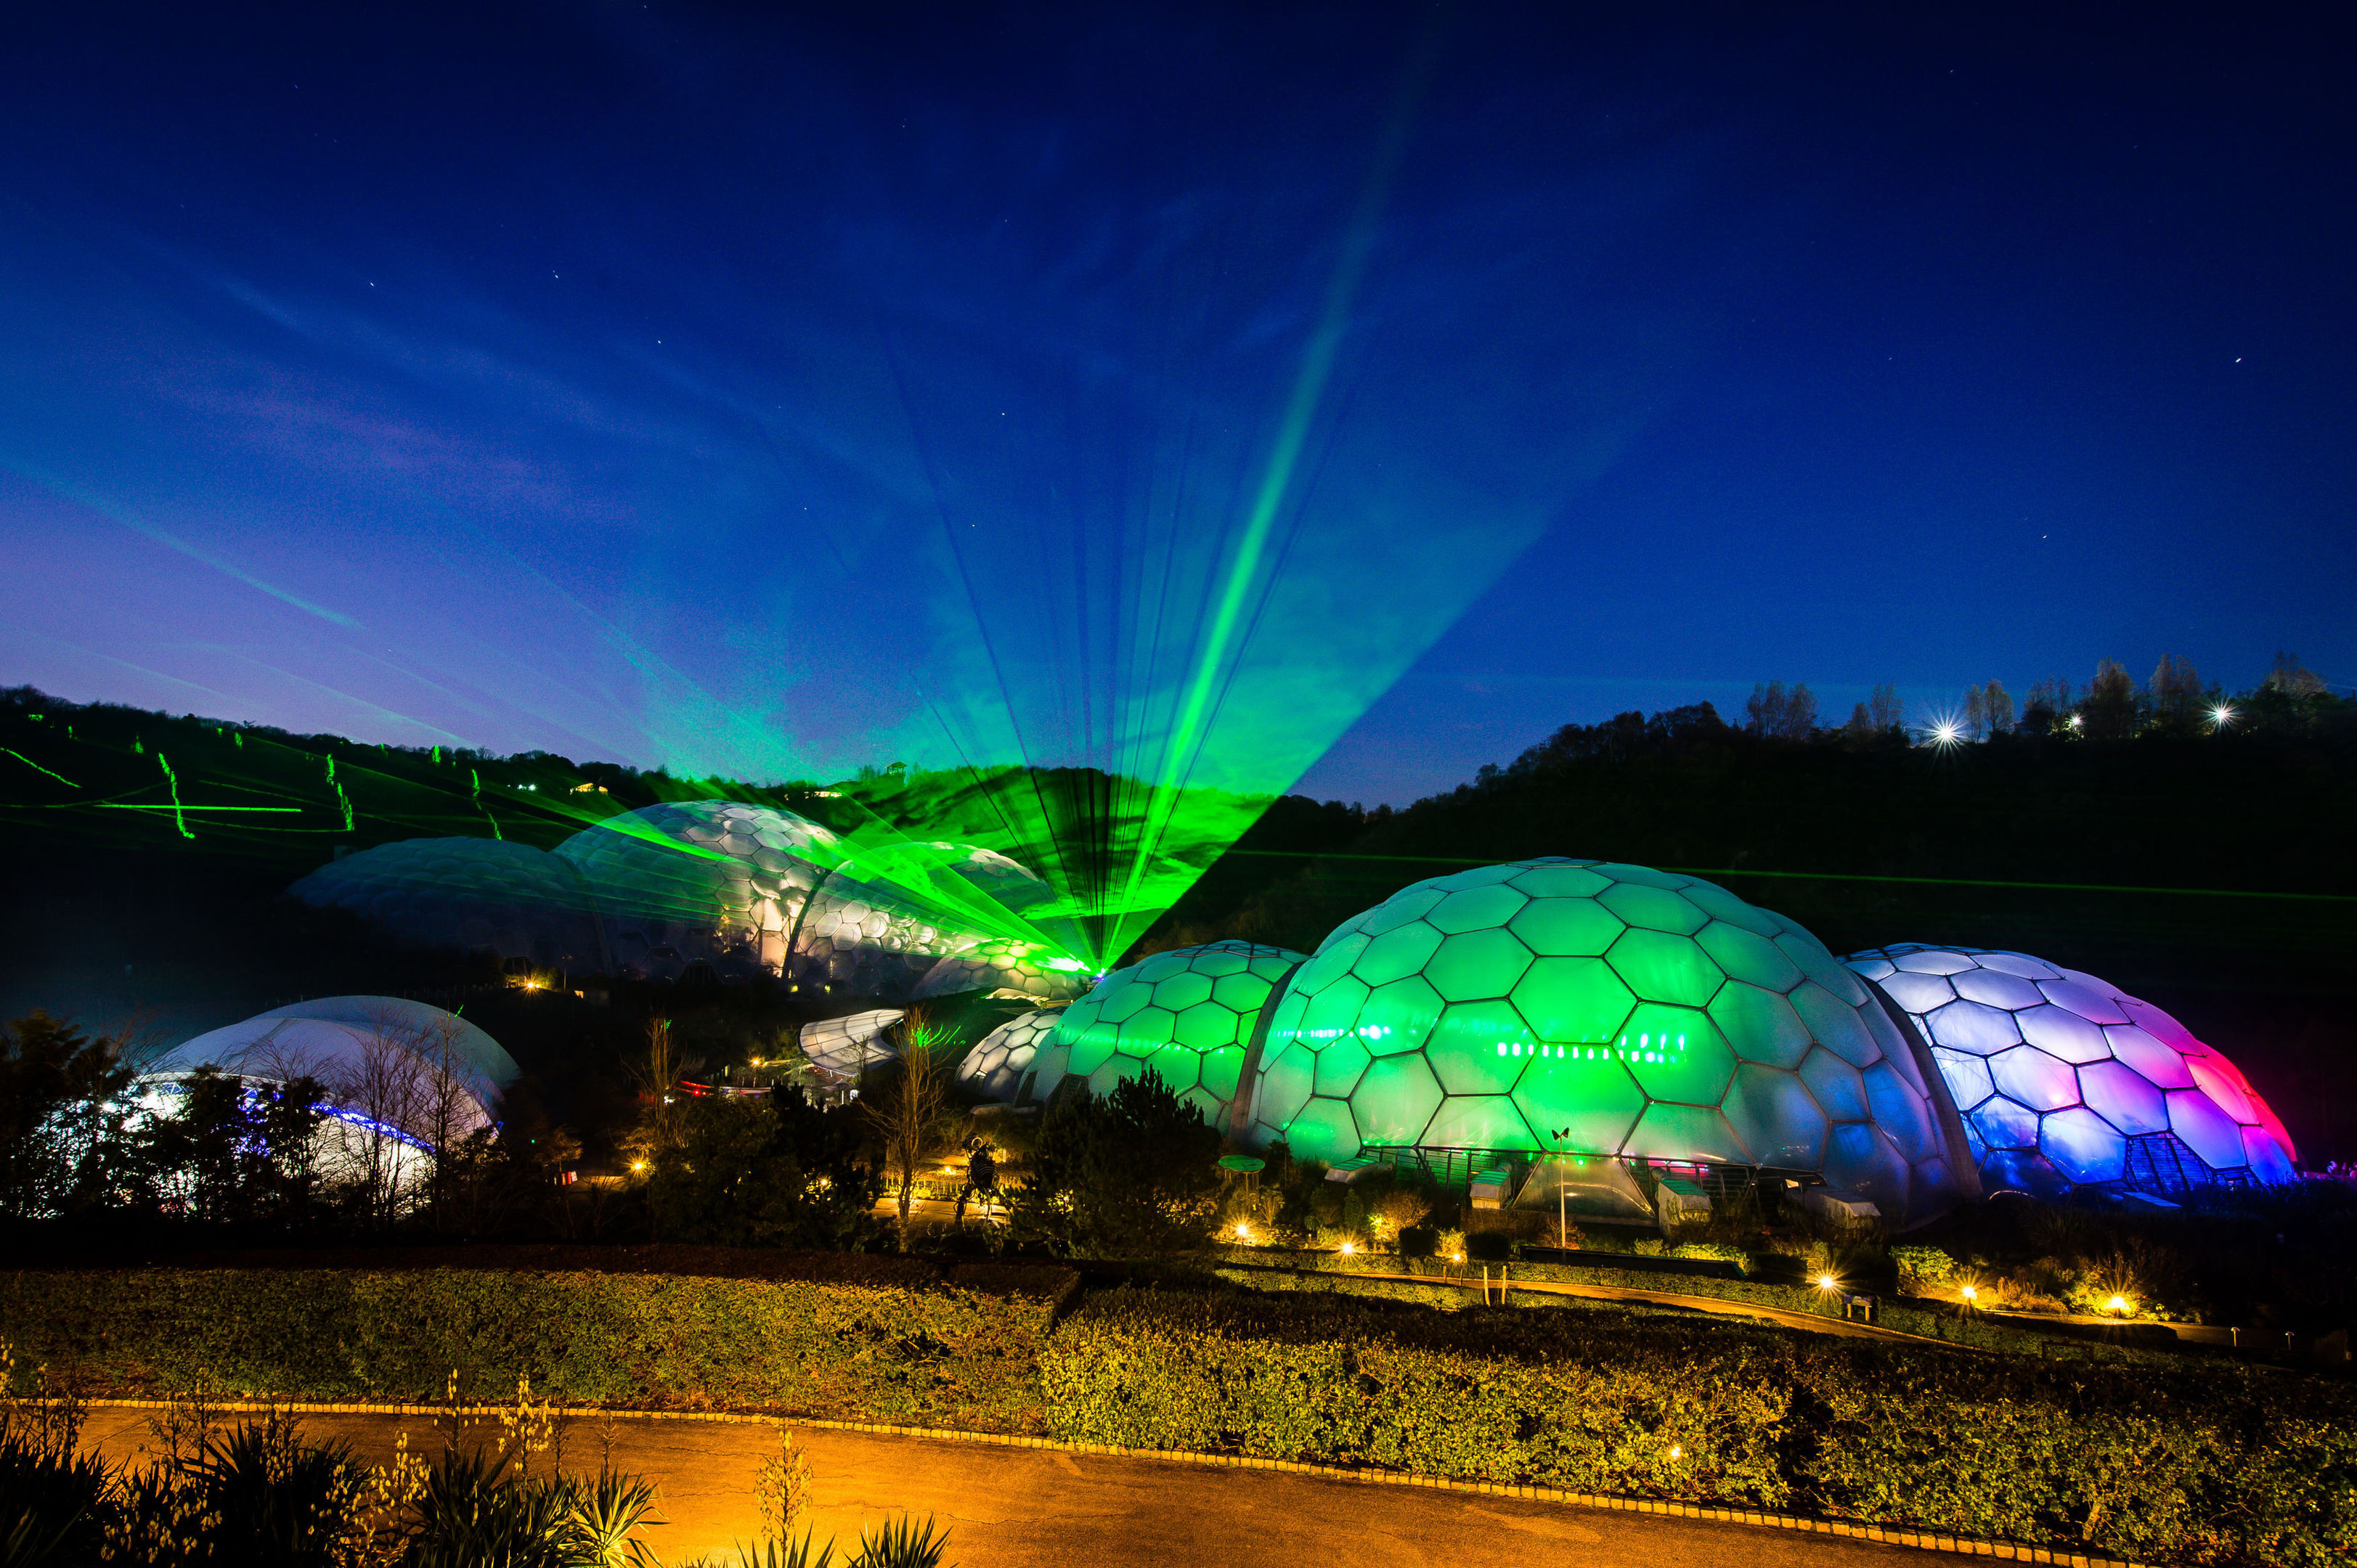 The Eden Project in Cornwall